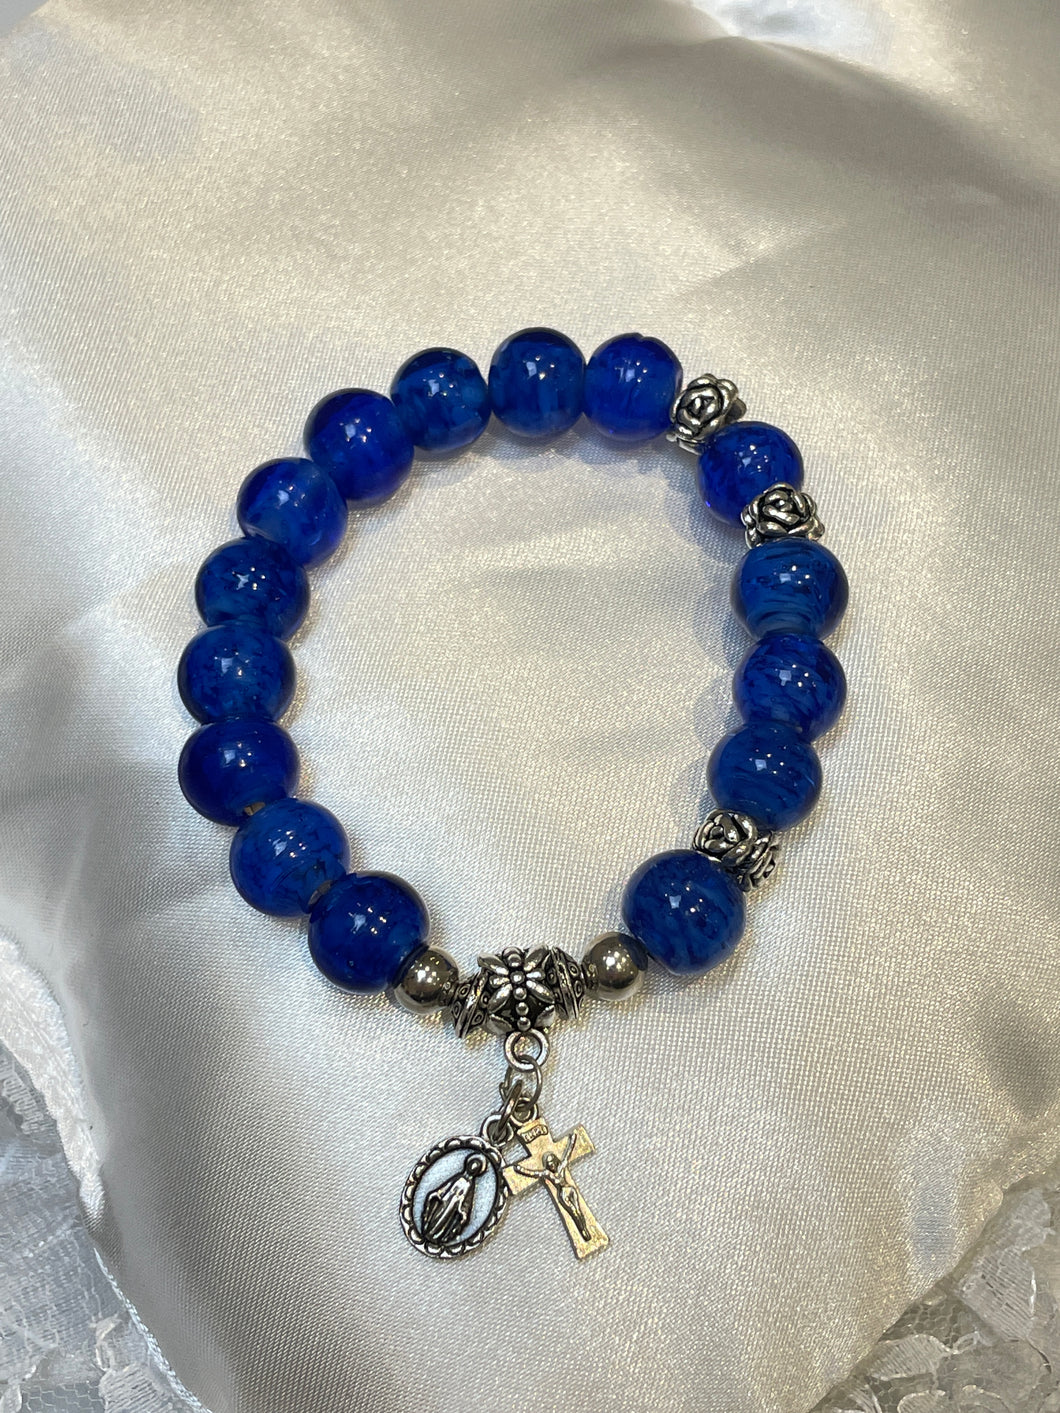 Navy Blue Gemstone Rosary Bracelet with Miraculous Medal and Crucifix Charms